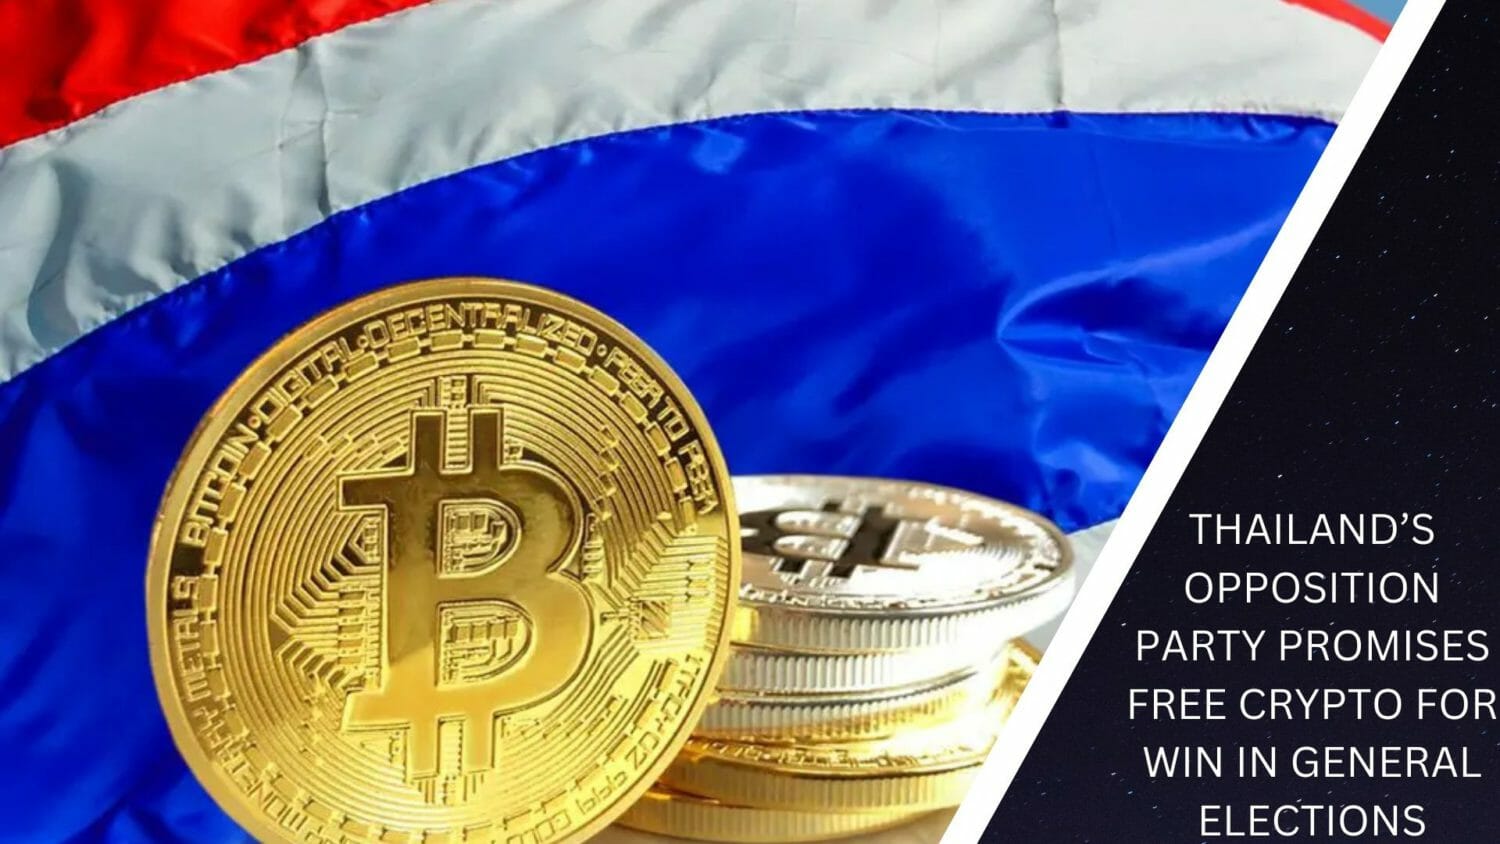 Thailand’s Opposition Party Promises Free Crypto For Win In General Elections